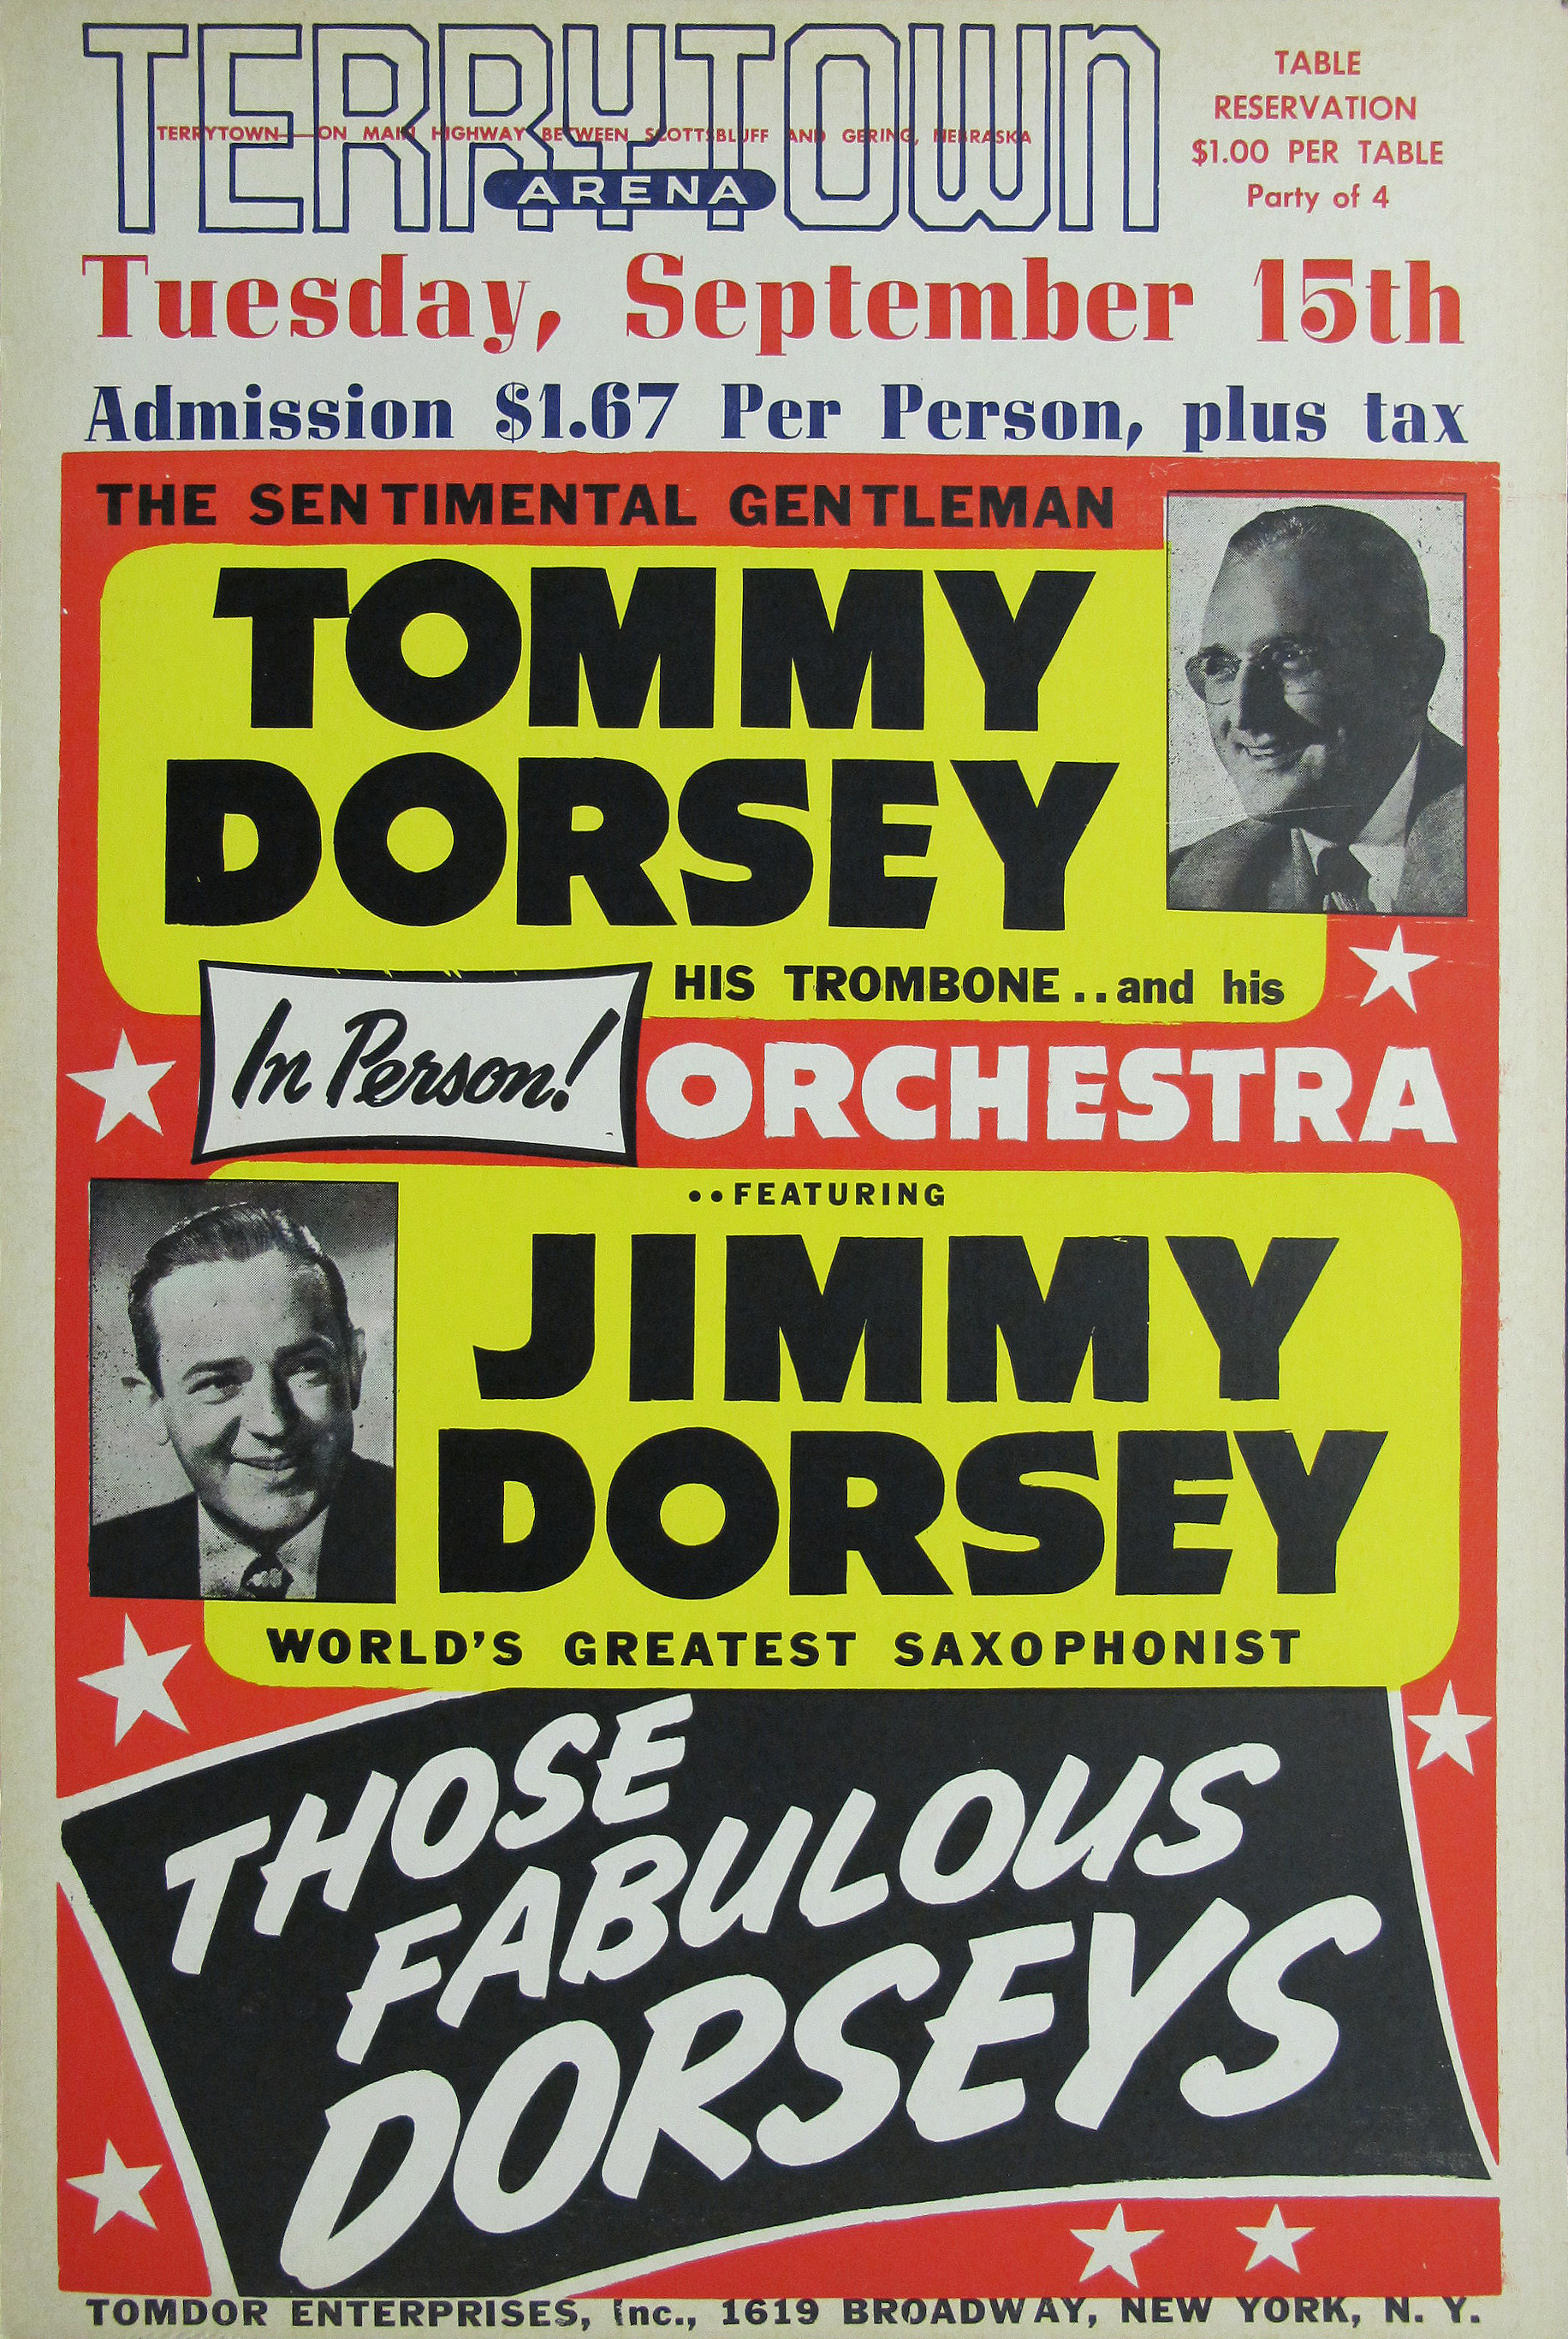 Tommy Dorsey Orchestra With Jimmy Dorsey Concert Poster